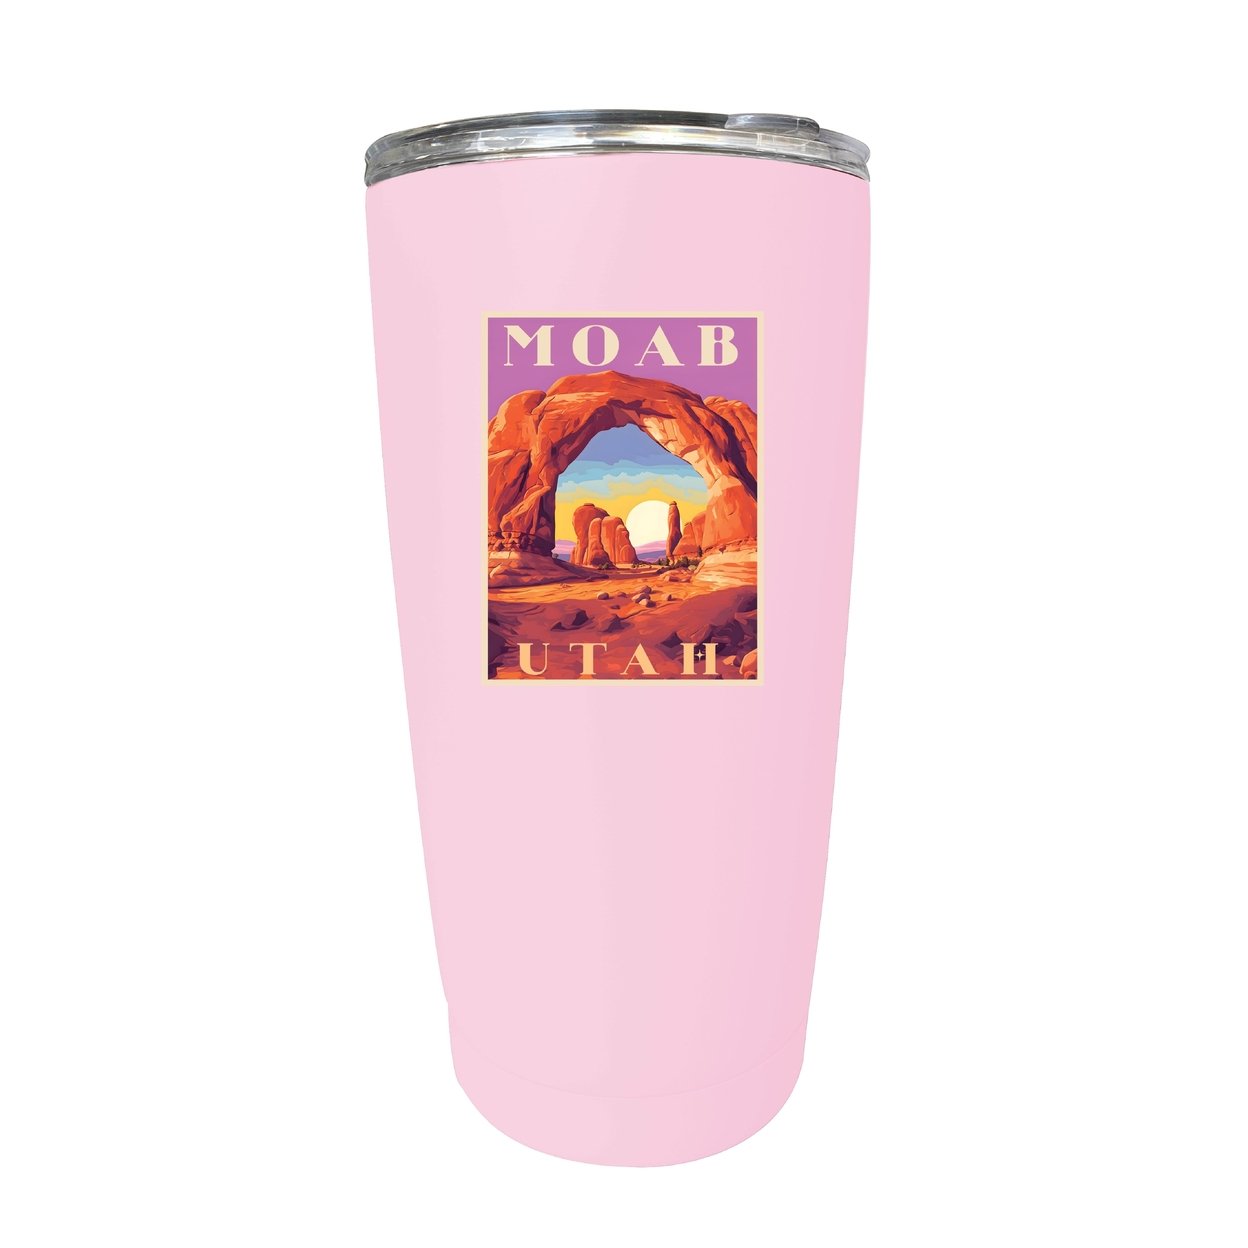 Moab Utah Souvenir 16 Oz Stainless Steel Insulated Tumbler - Pink,,2-Pack